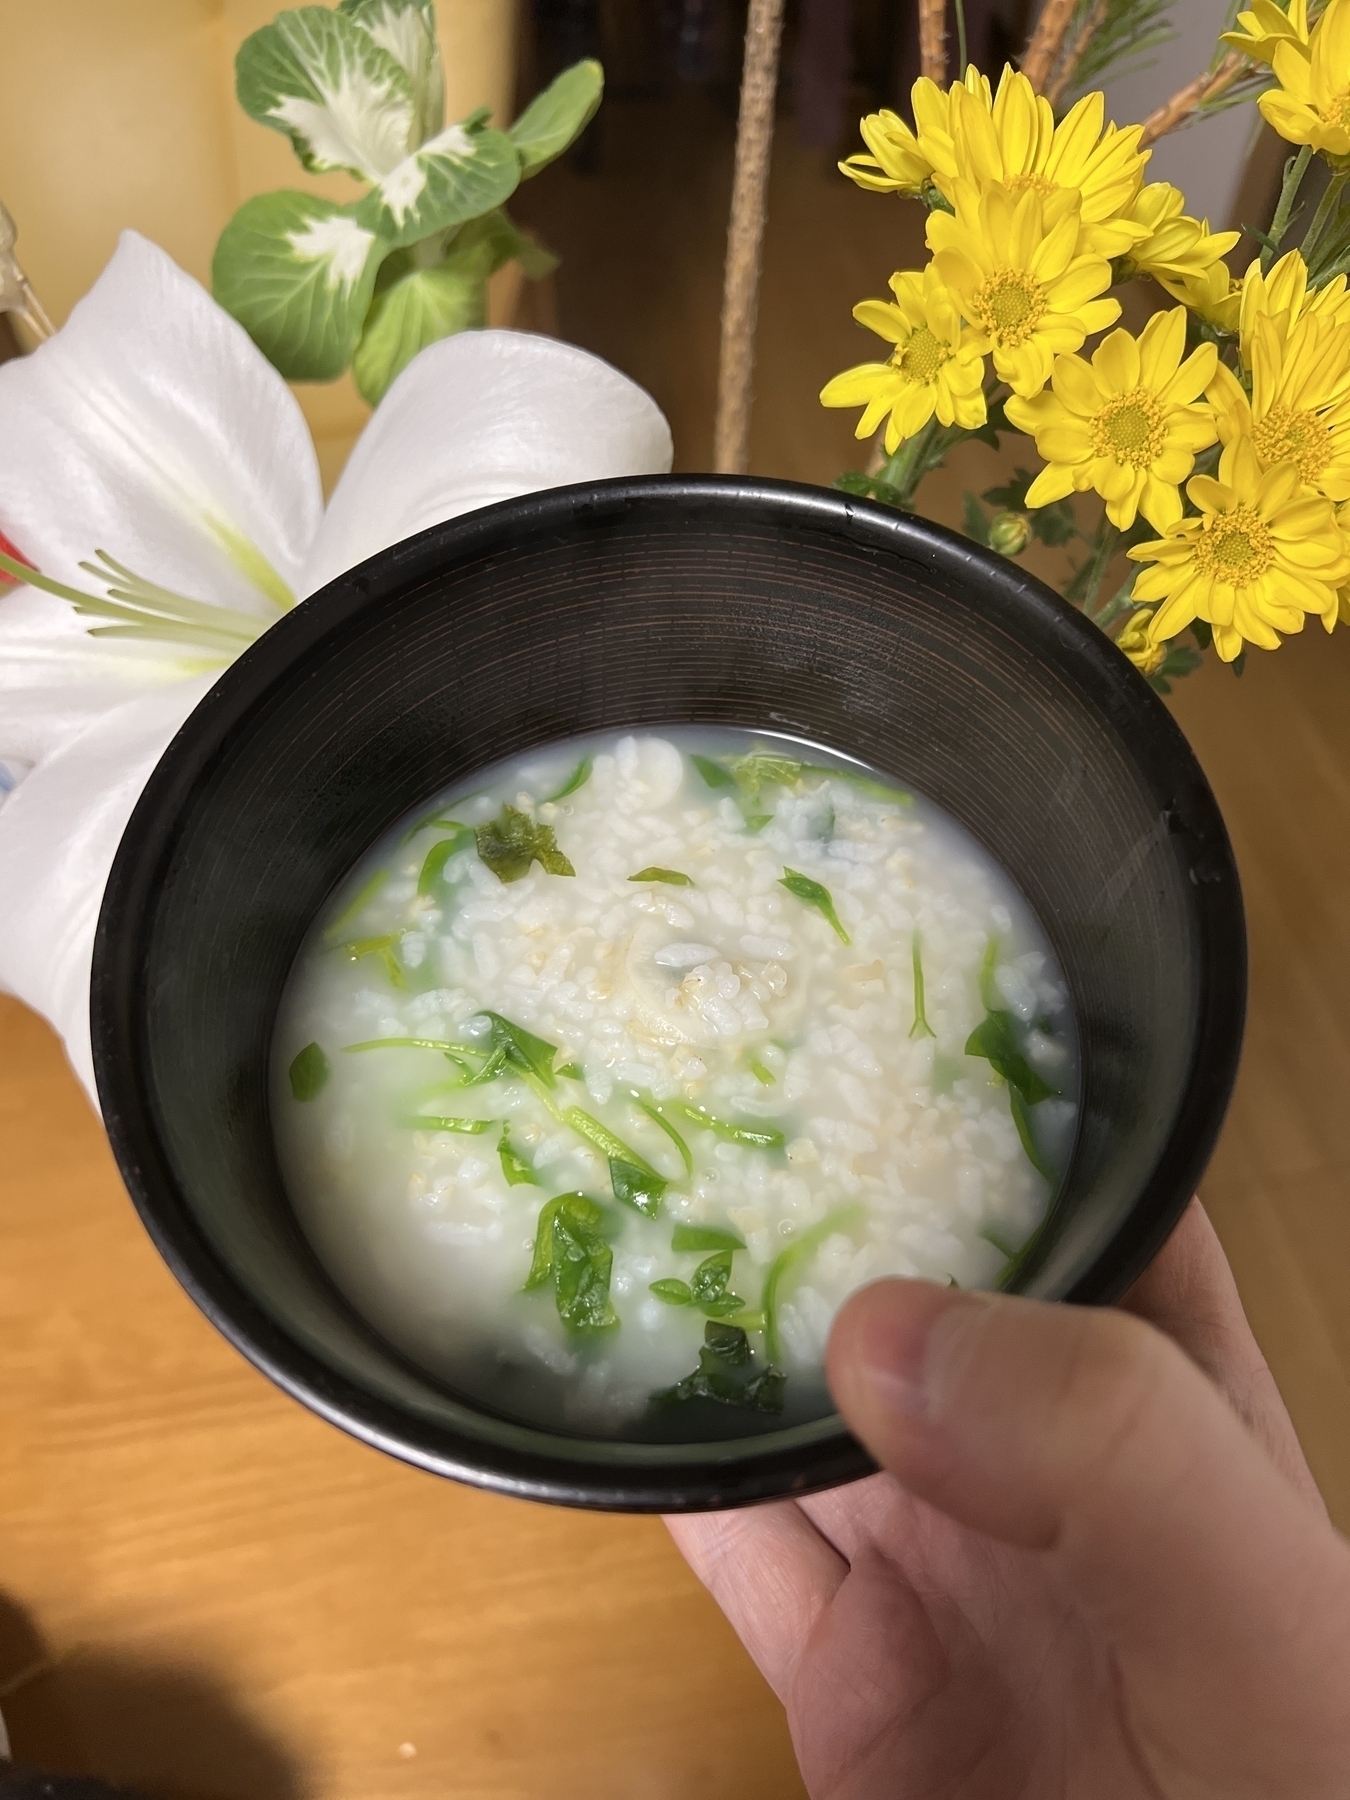 A bowl of rice porridge with a number of visible green herbs